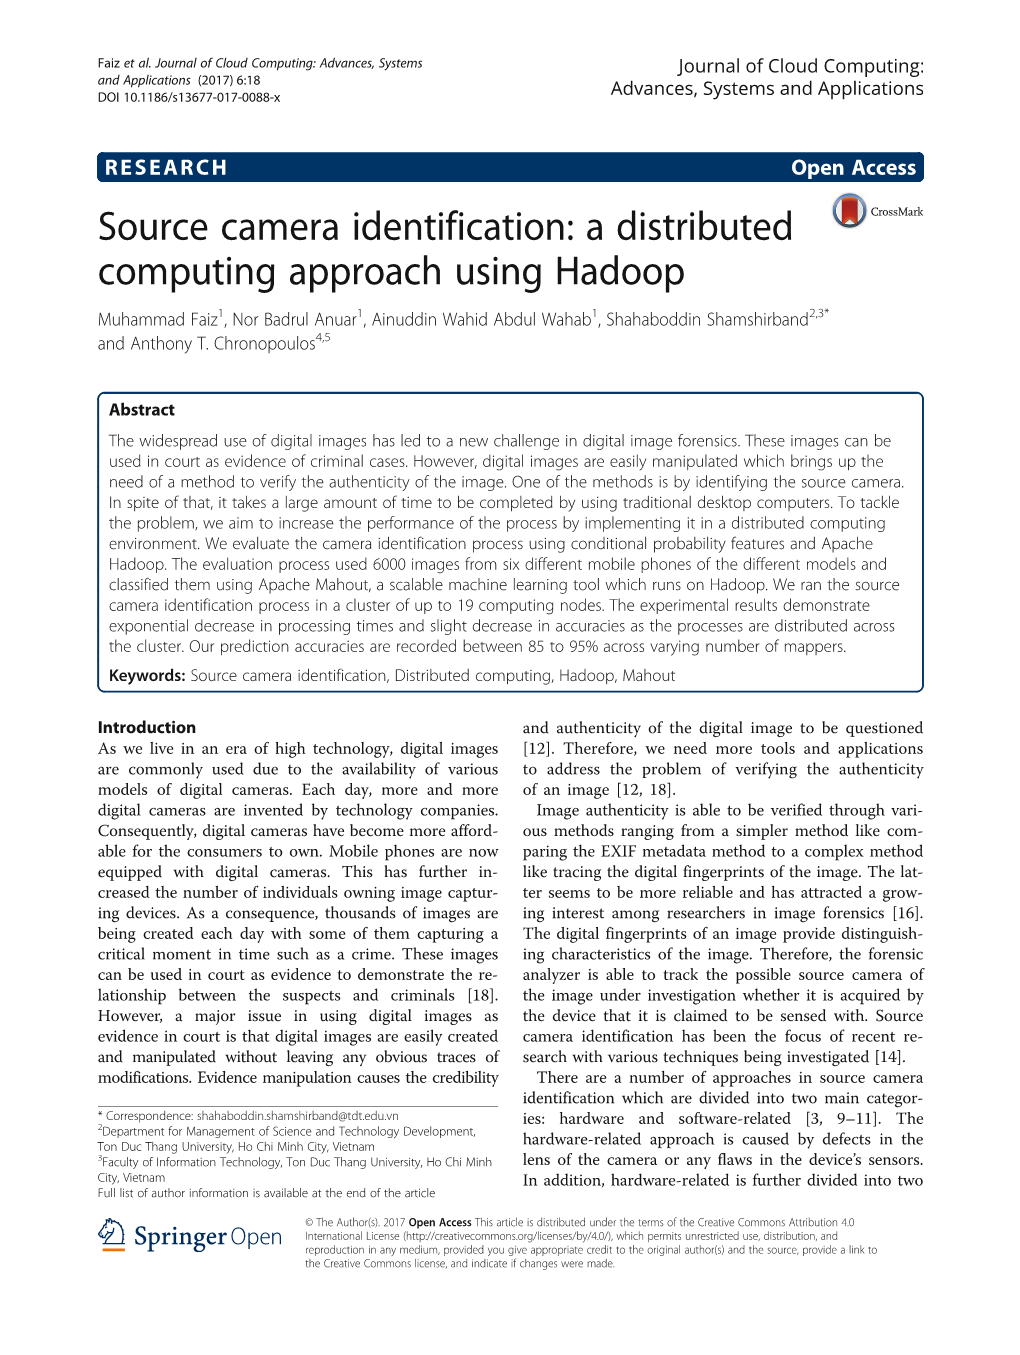 Source Camera Identification: a Distributed Computing Approach